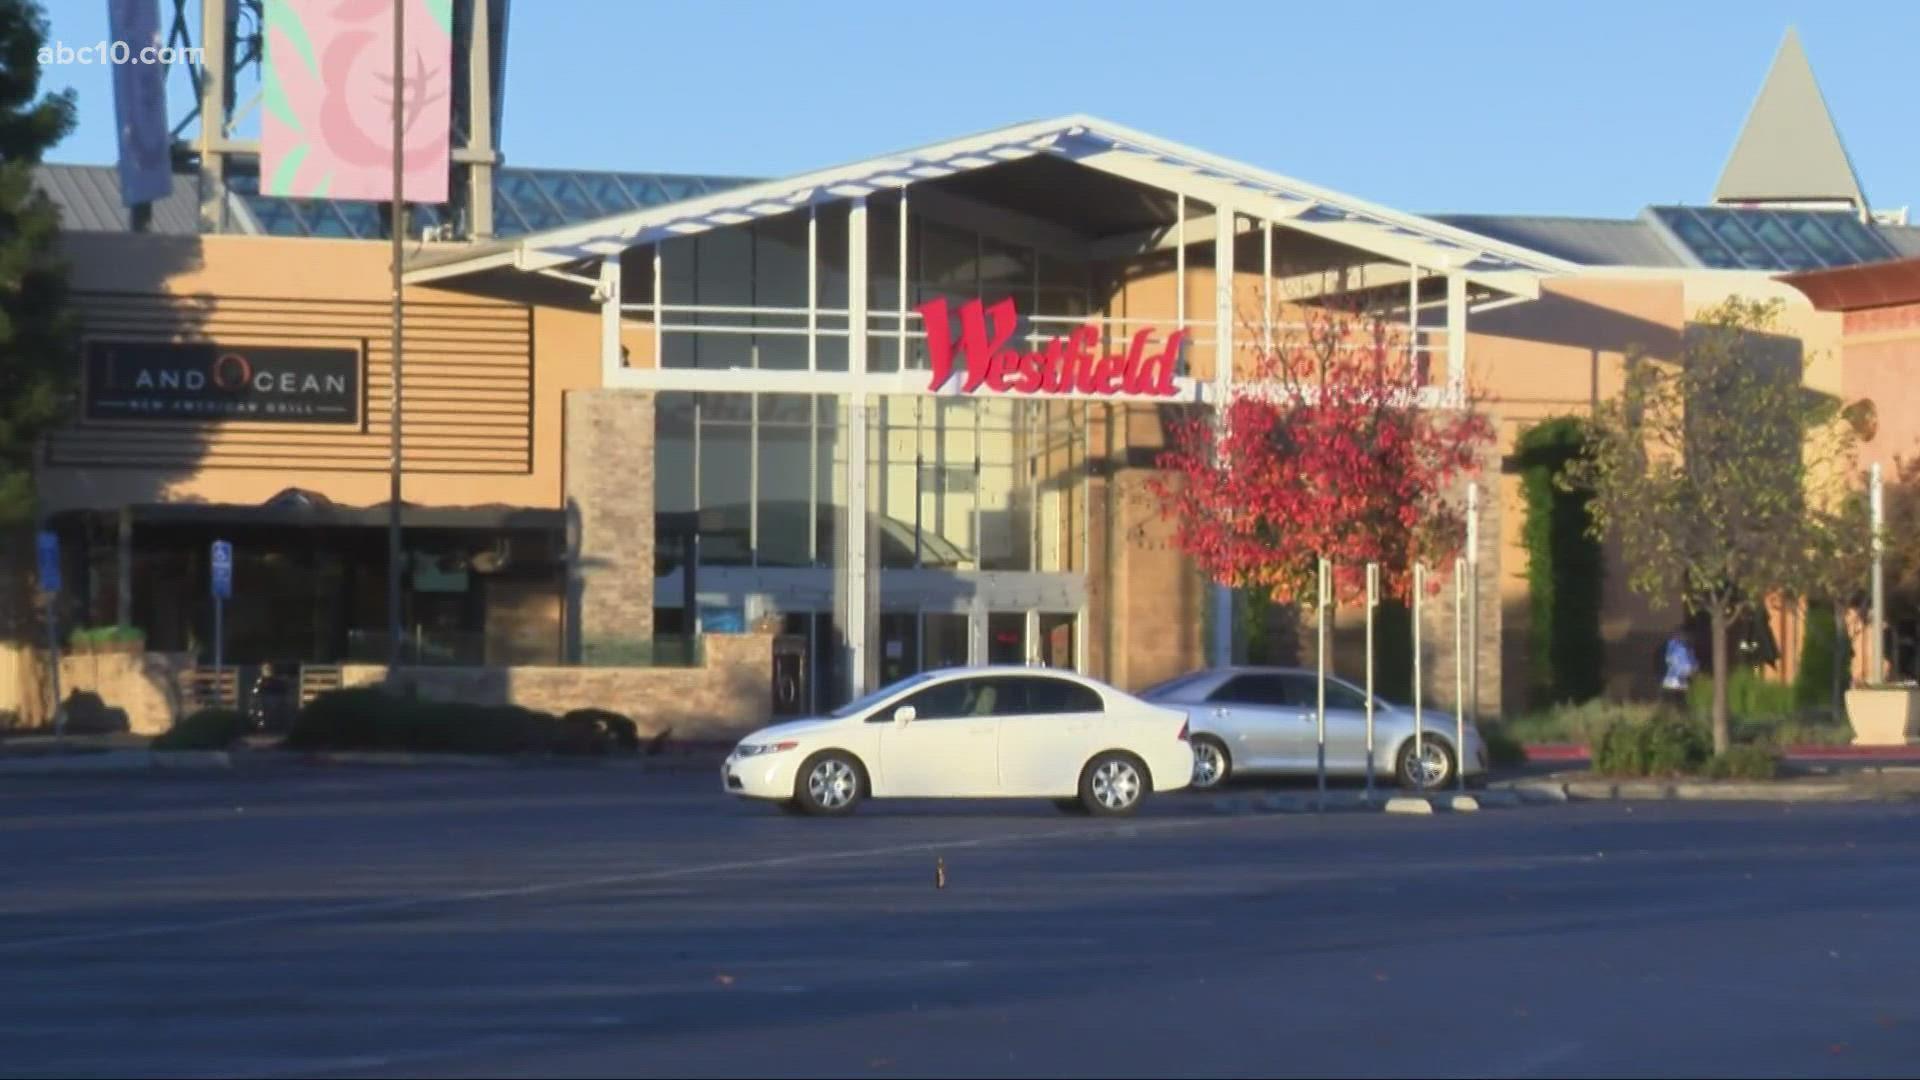 After a group of masked would-be thieves tried breaking into a jewelry store in the mall, police in Roseville say they're ramping up patrol as Black Friday rolls in.